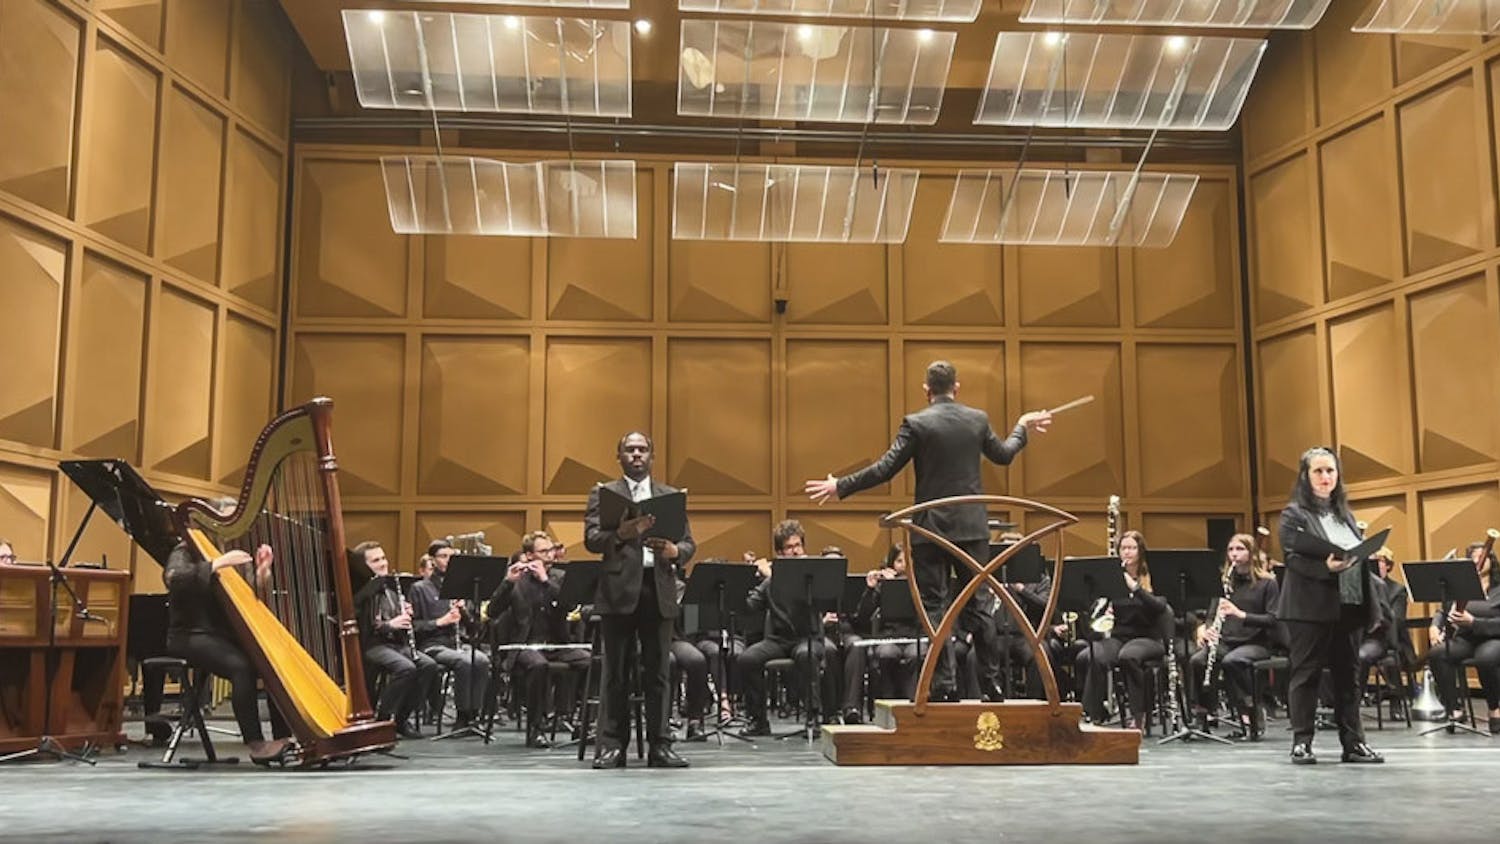 The USC wind ensemble performs its iteration of New Morning for the World by Joseph Schwantner at the Kroger Center on Feb. 10, 2023. The ensemble is conducted by Cormac Cannon, the director of bands and a professor at the USC School of Music.&nbsp;